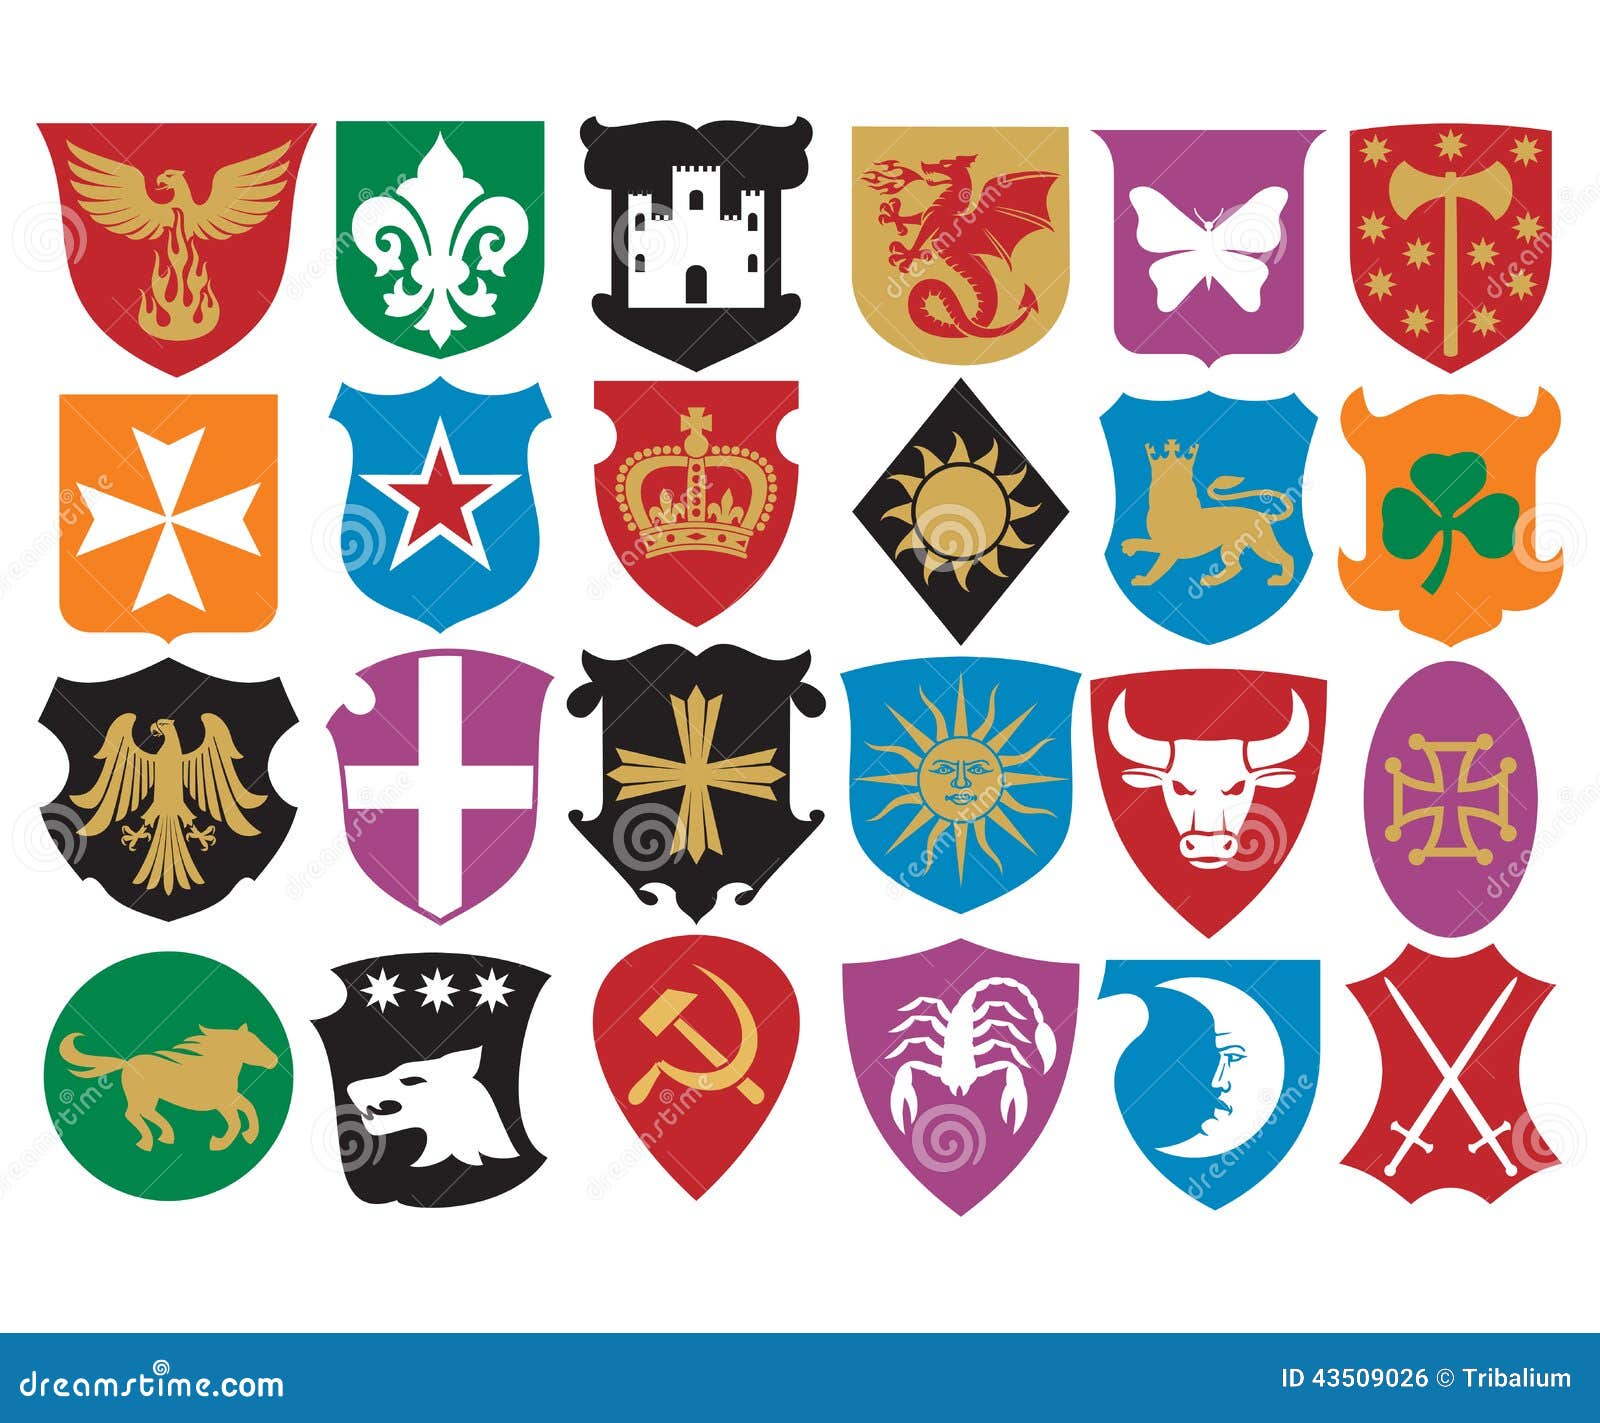 heraldic clipart collection - photo #36